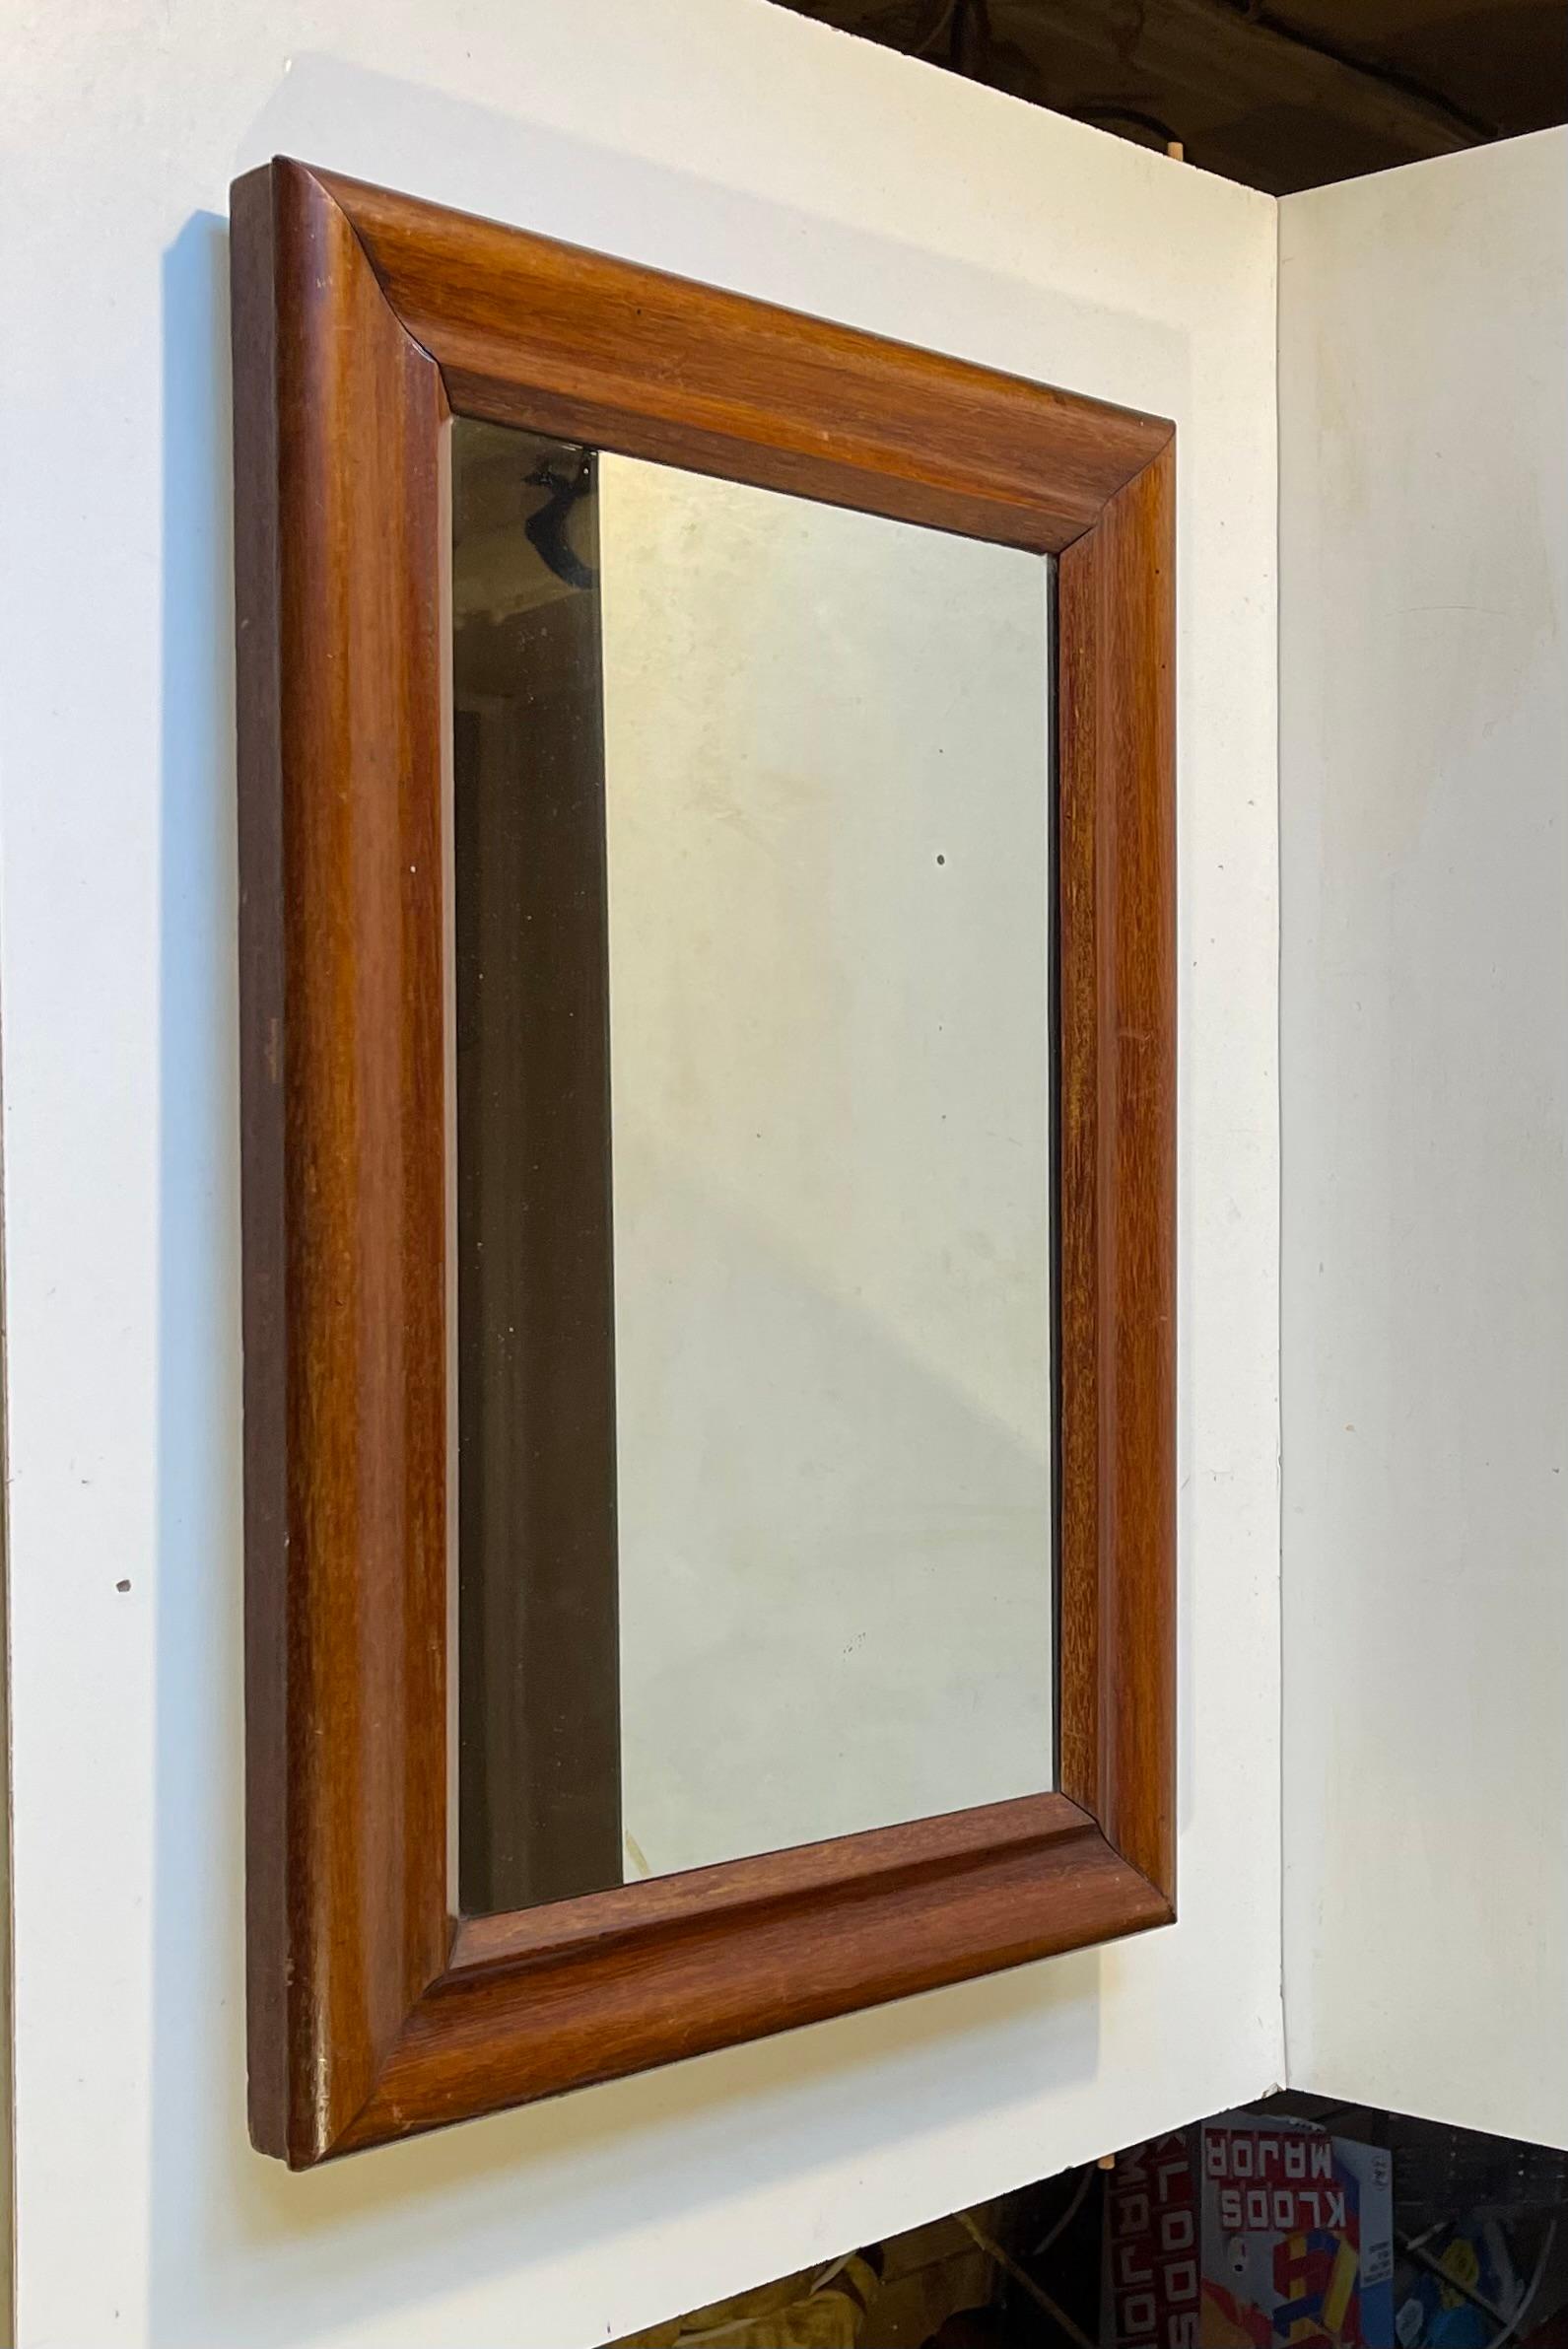 A small wall mirror in Mahogany veneer upon oak and pine. Clean curves and plain lines. Made by a Danish cabinetmaker during the early 1900s. Measurements: 52x36x4 cm in frame. The mahogany veneer used in this mirror frame can be exported freely